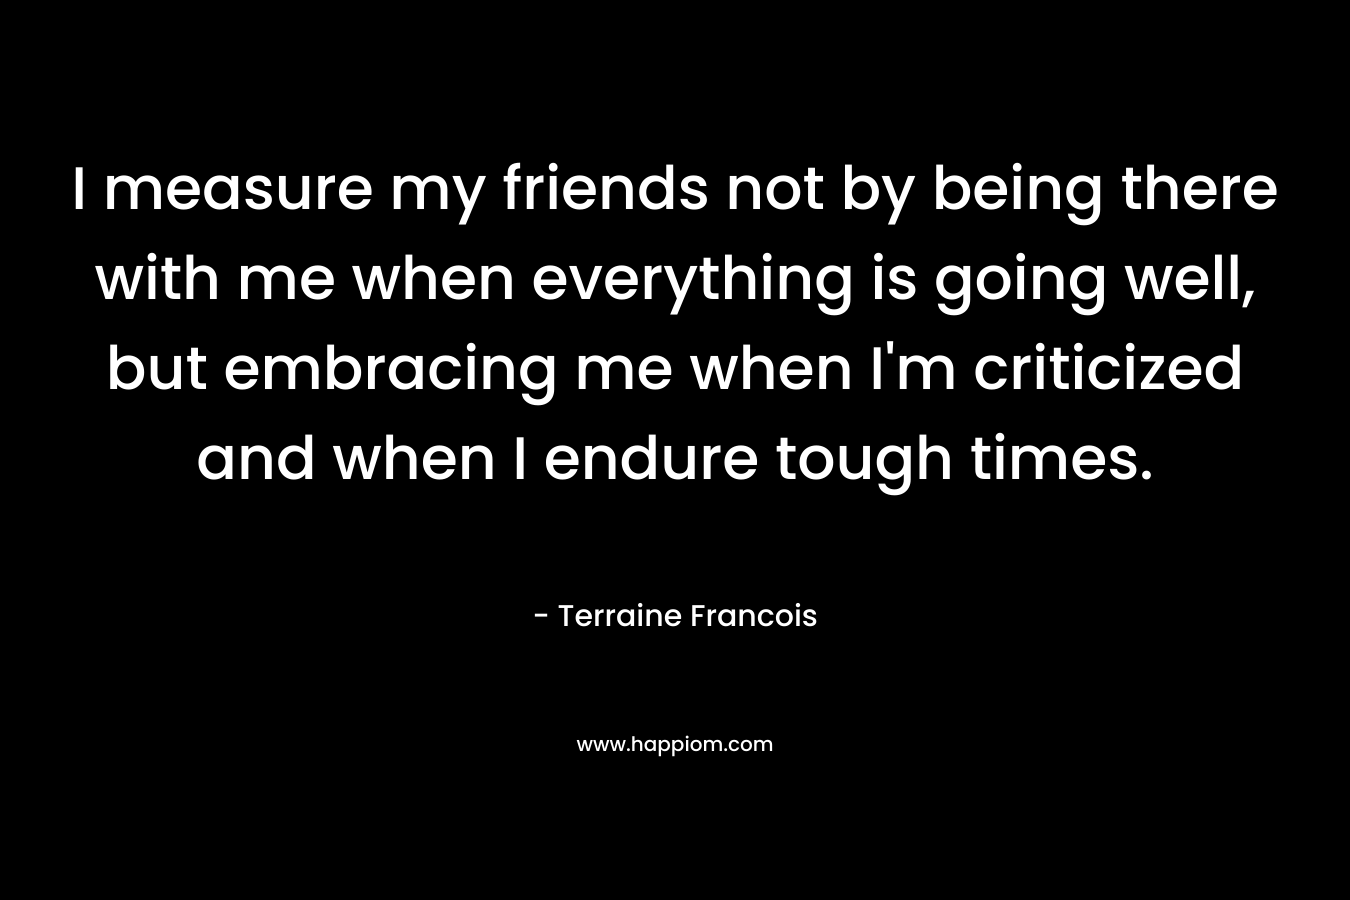 I measure my friends not by being there with me when everything is going well, but embracing me when I’m criticized and when I endure tough times. – Terraine Francois